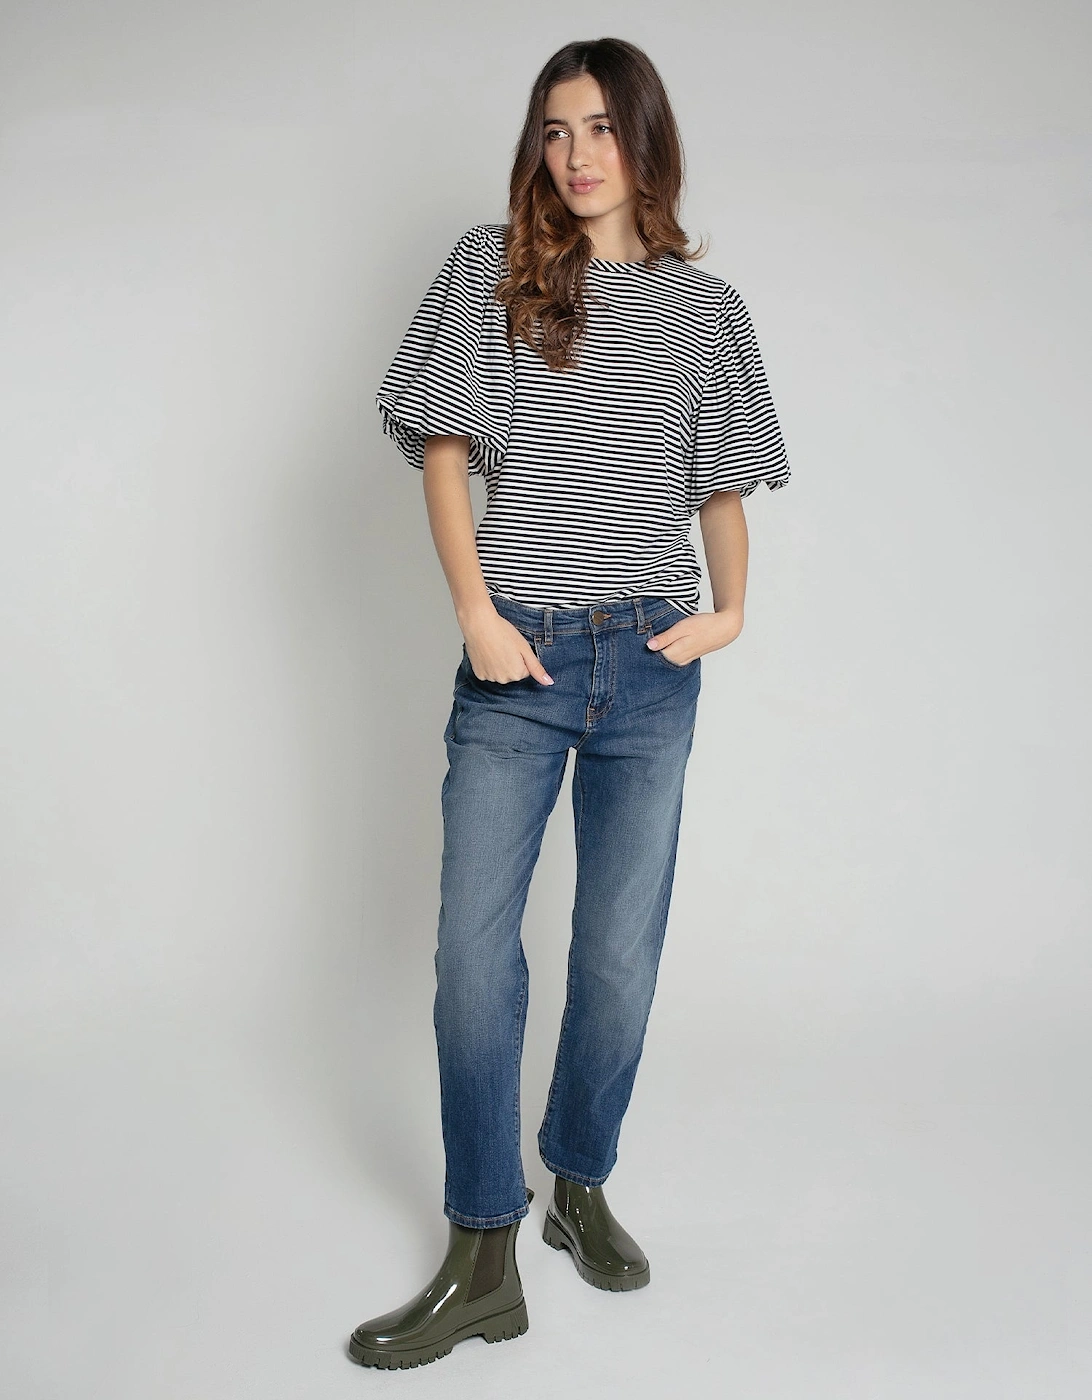 Rhea Top in Navy and White Stripe, 6 of 5